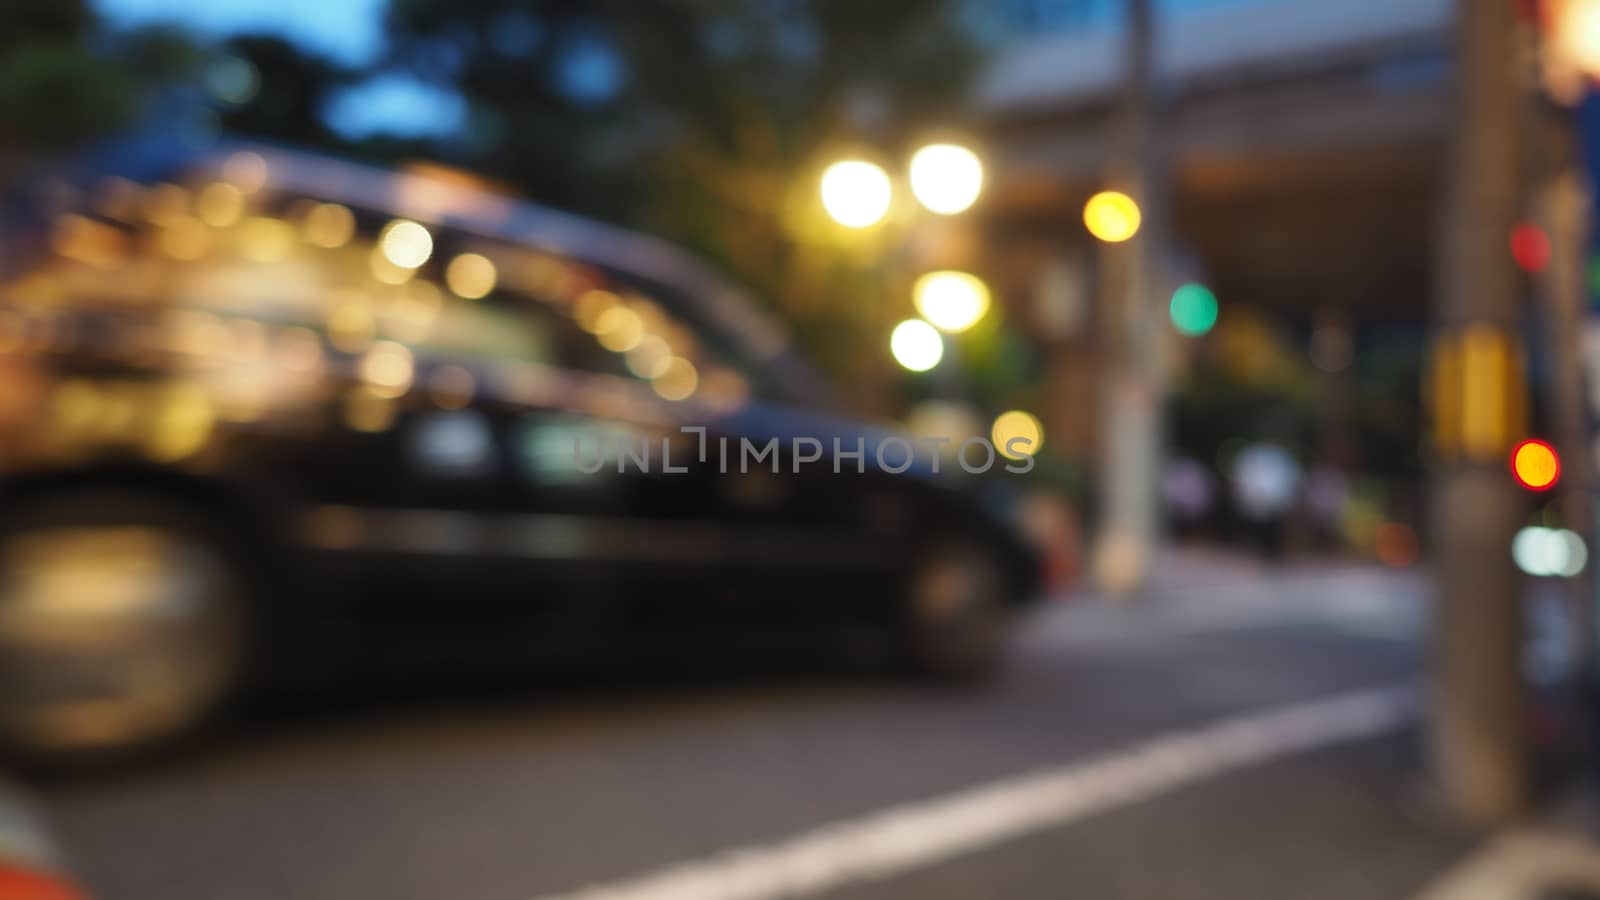 Blurry image of city street life. by gnepphoto